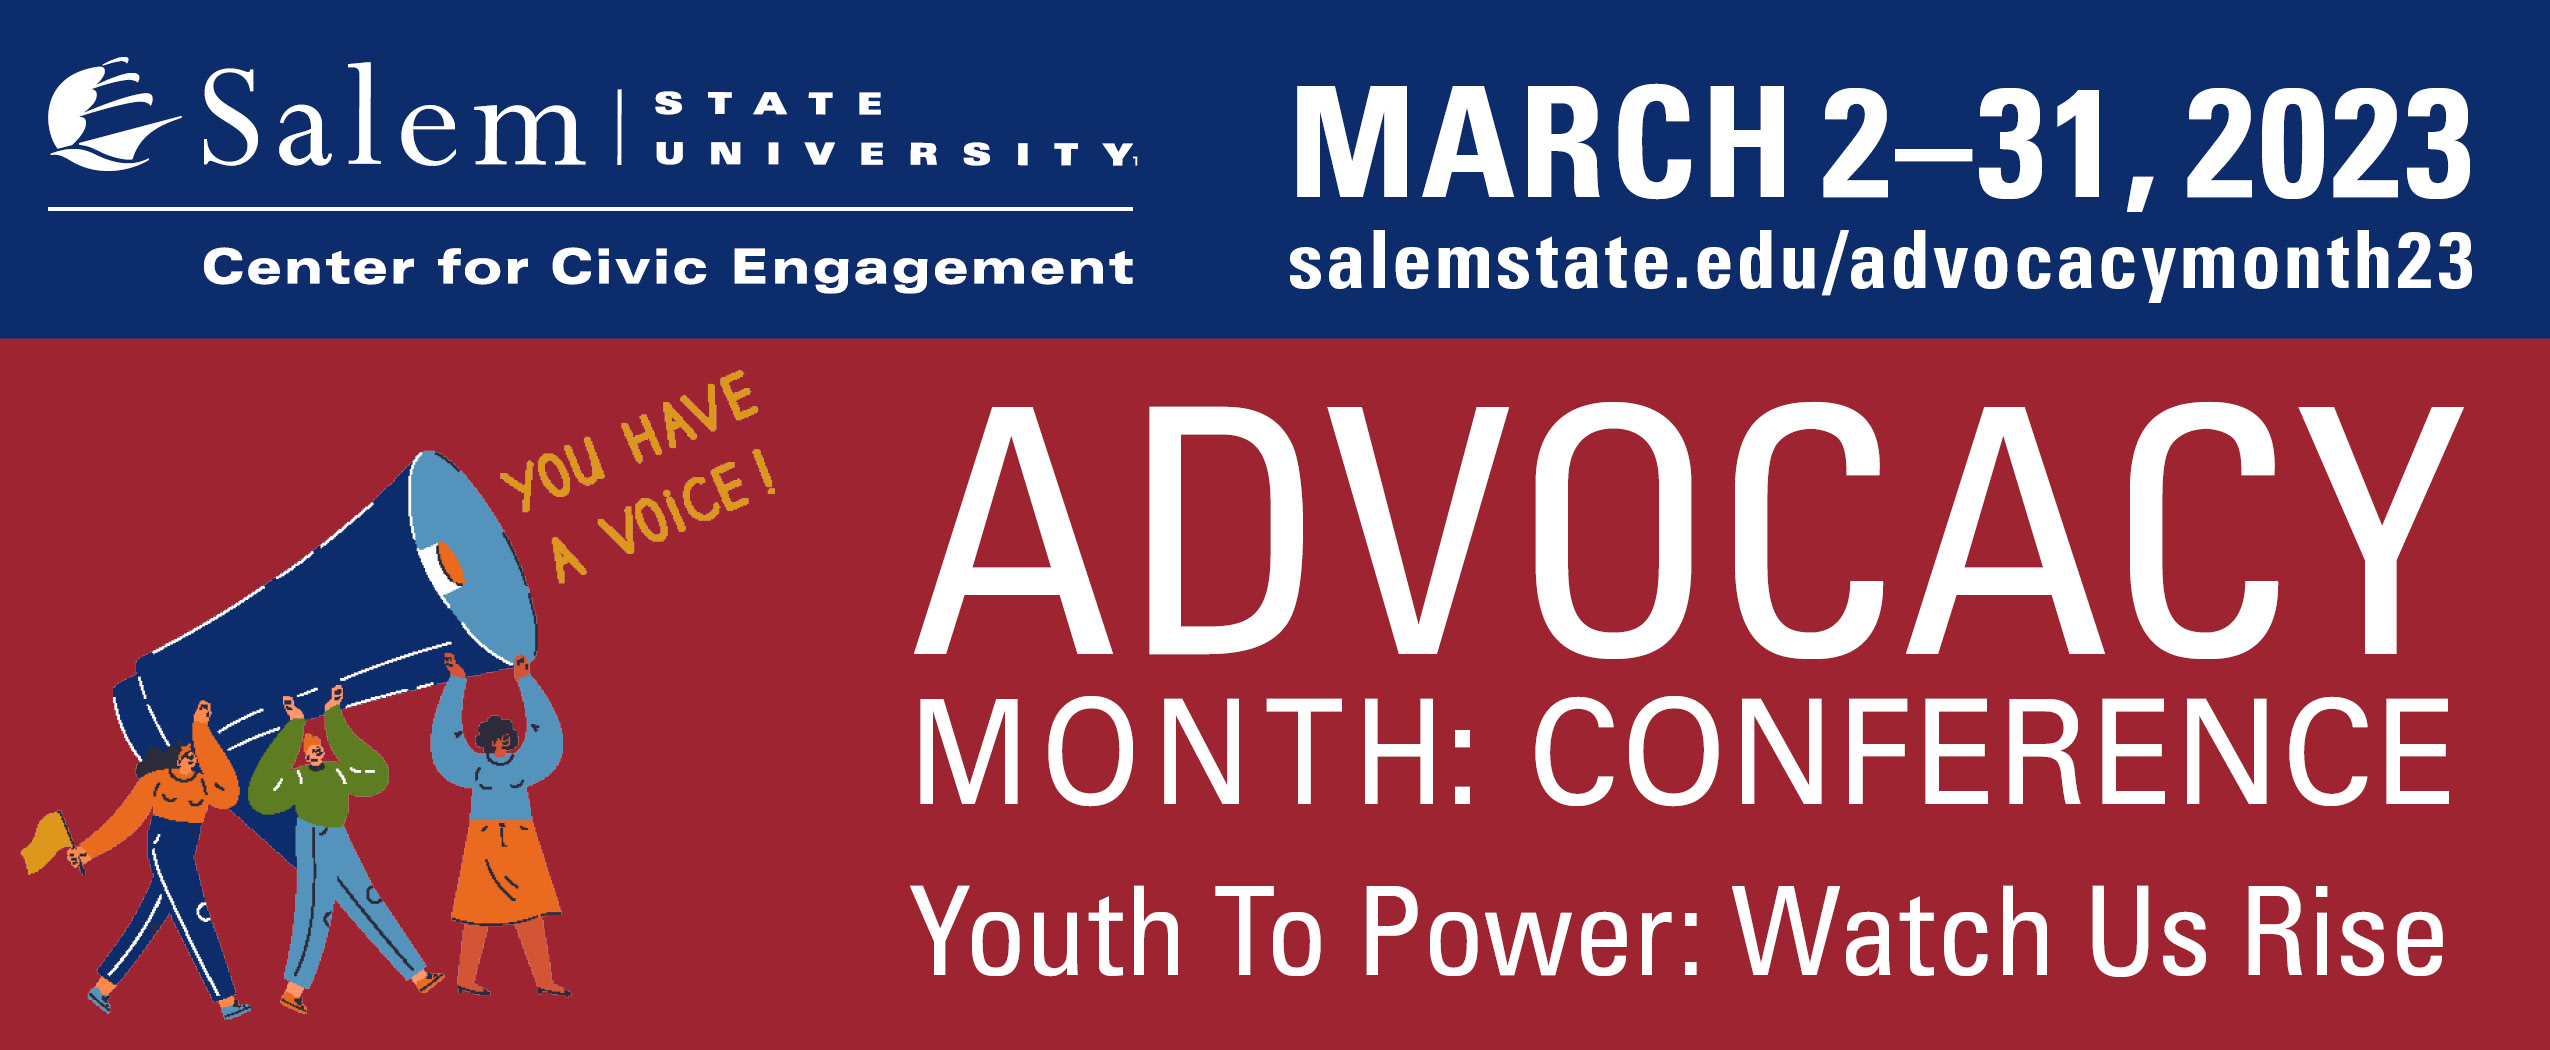 Advocacy Month Conference 2023. Youth to Power: Watch us Rise. March 2-31, 2023…